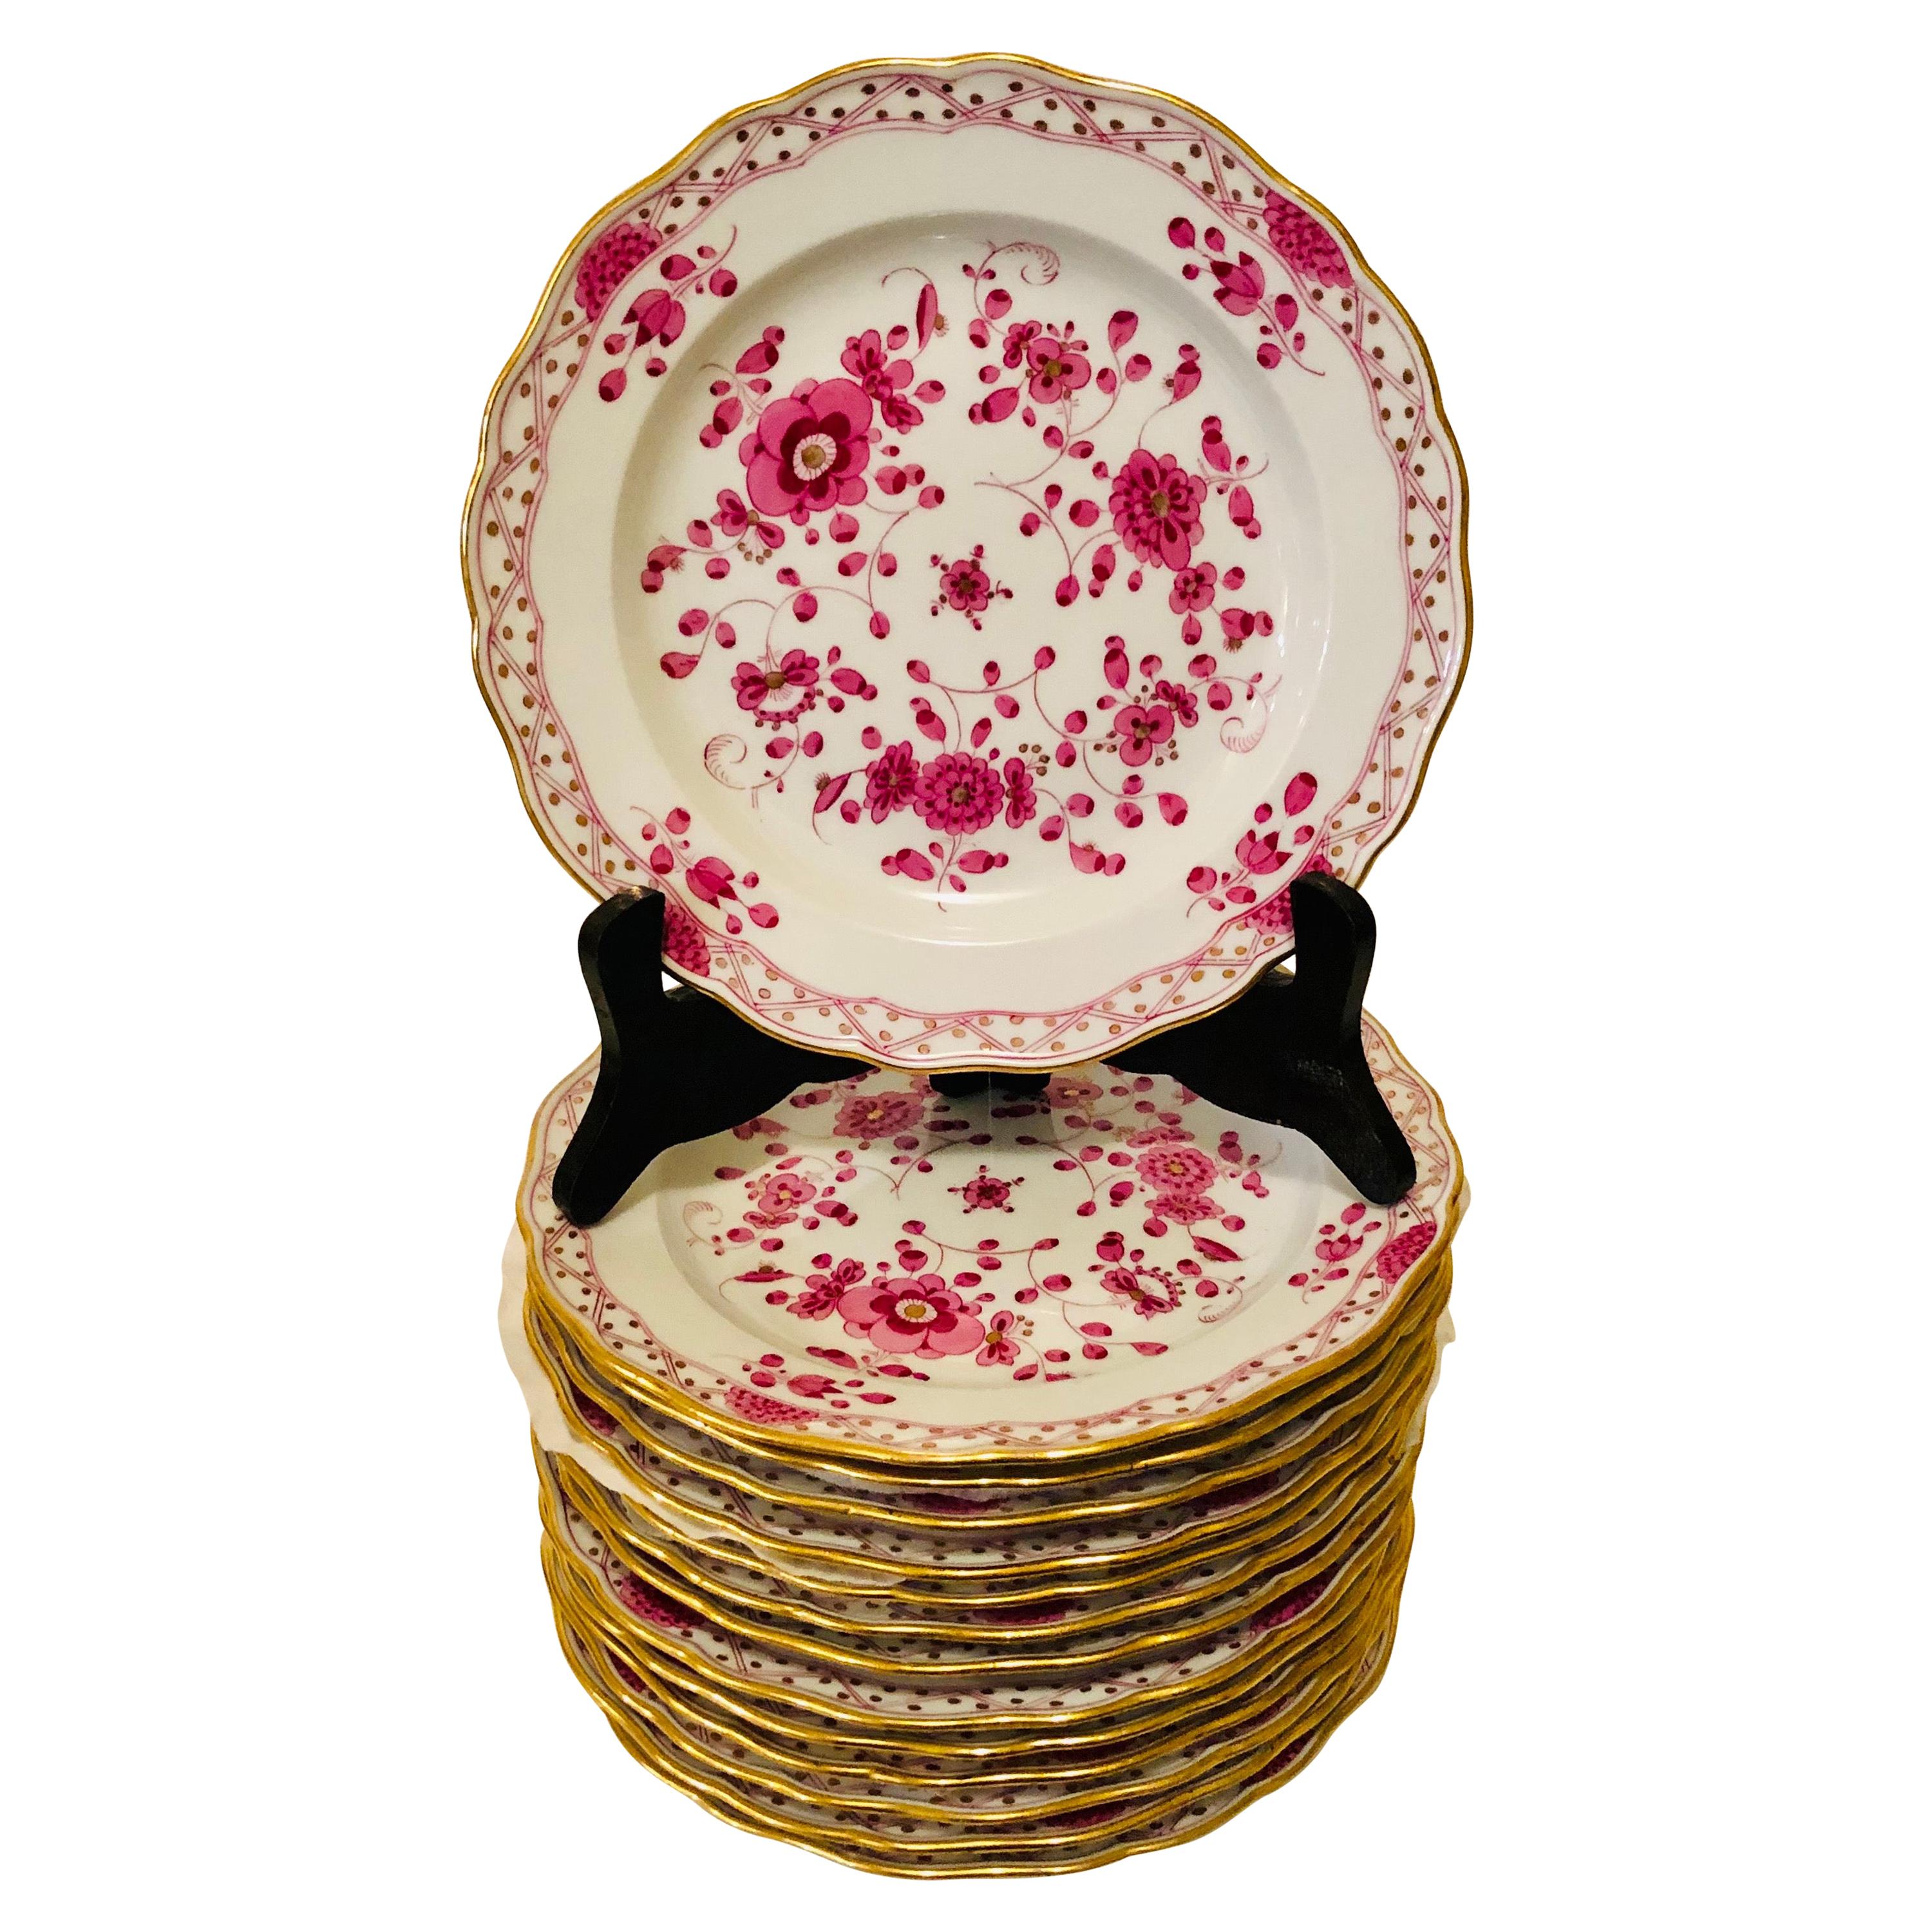 Set of Fourteen Meissen Purple Indian Dessert Plates from the Late 19th Century